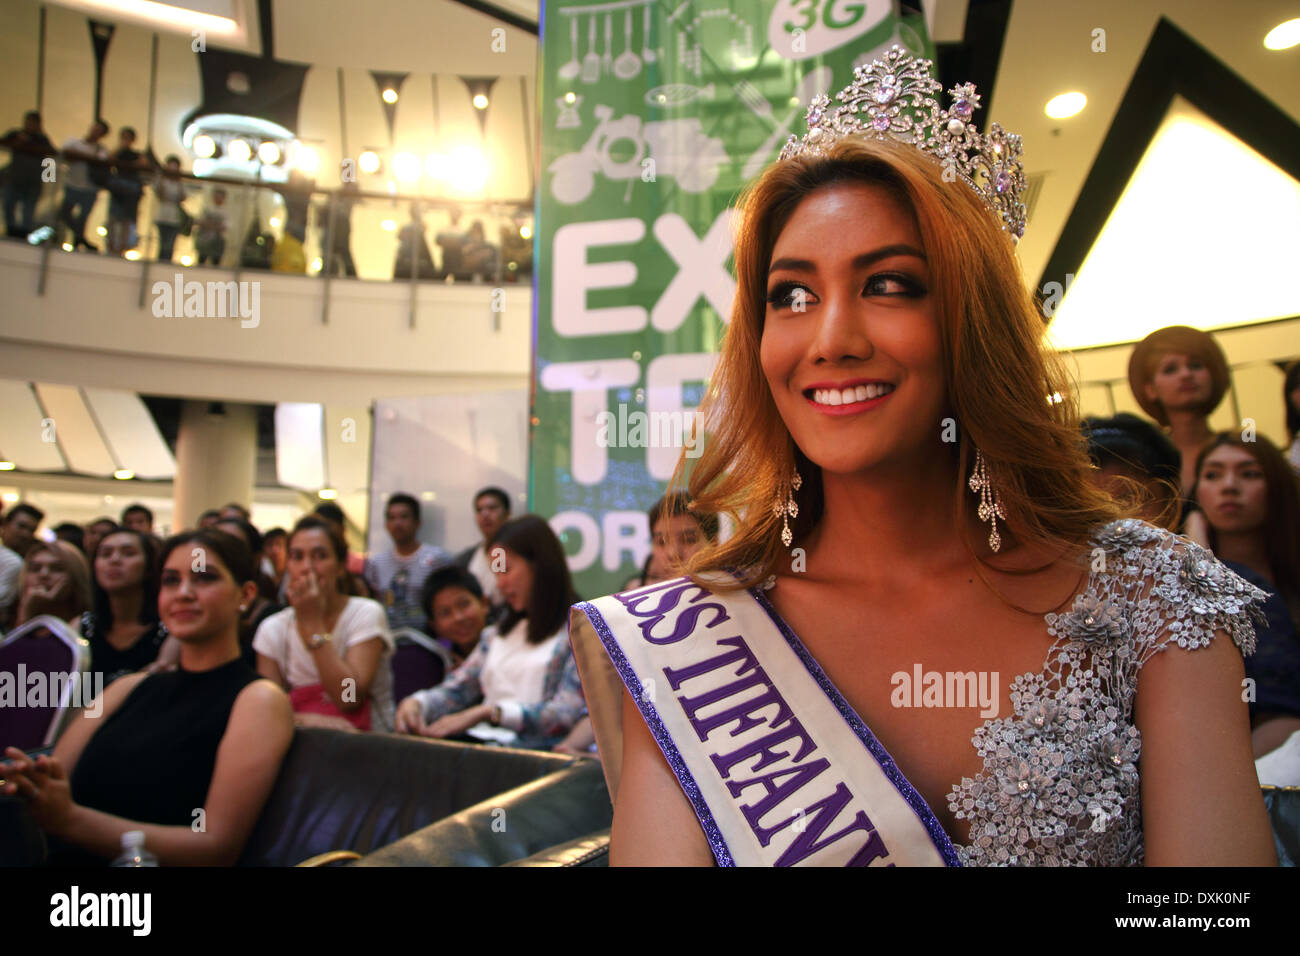 Bangkok, Thailand. 26th Mar, 2014.  Winner of the Miss Tiffany Universe contest in 2013, Nethnapada Kanrayanon during qualification for the transvestite and transgender beauty pageant Miss Tiffany Universe 2014. About 70 candidates registered for the contest. The Miss Tiffany Universe contest has been running for 16 years, with all of the transsexual or transvestite contestants aiming to promote human rights for the transgender population in Thailand. Credit:  Sanji Dee/Alamy Live News Stock Photo